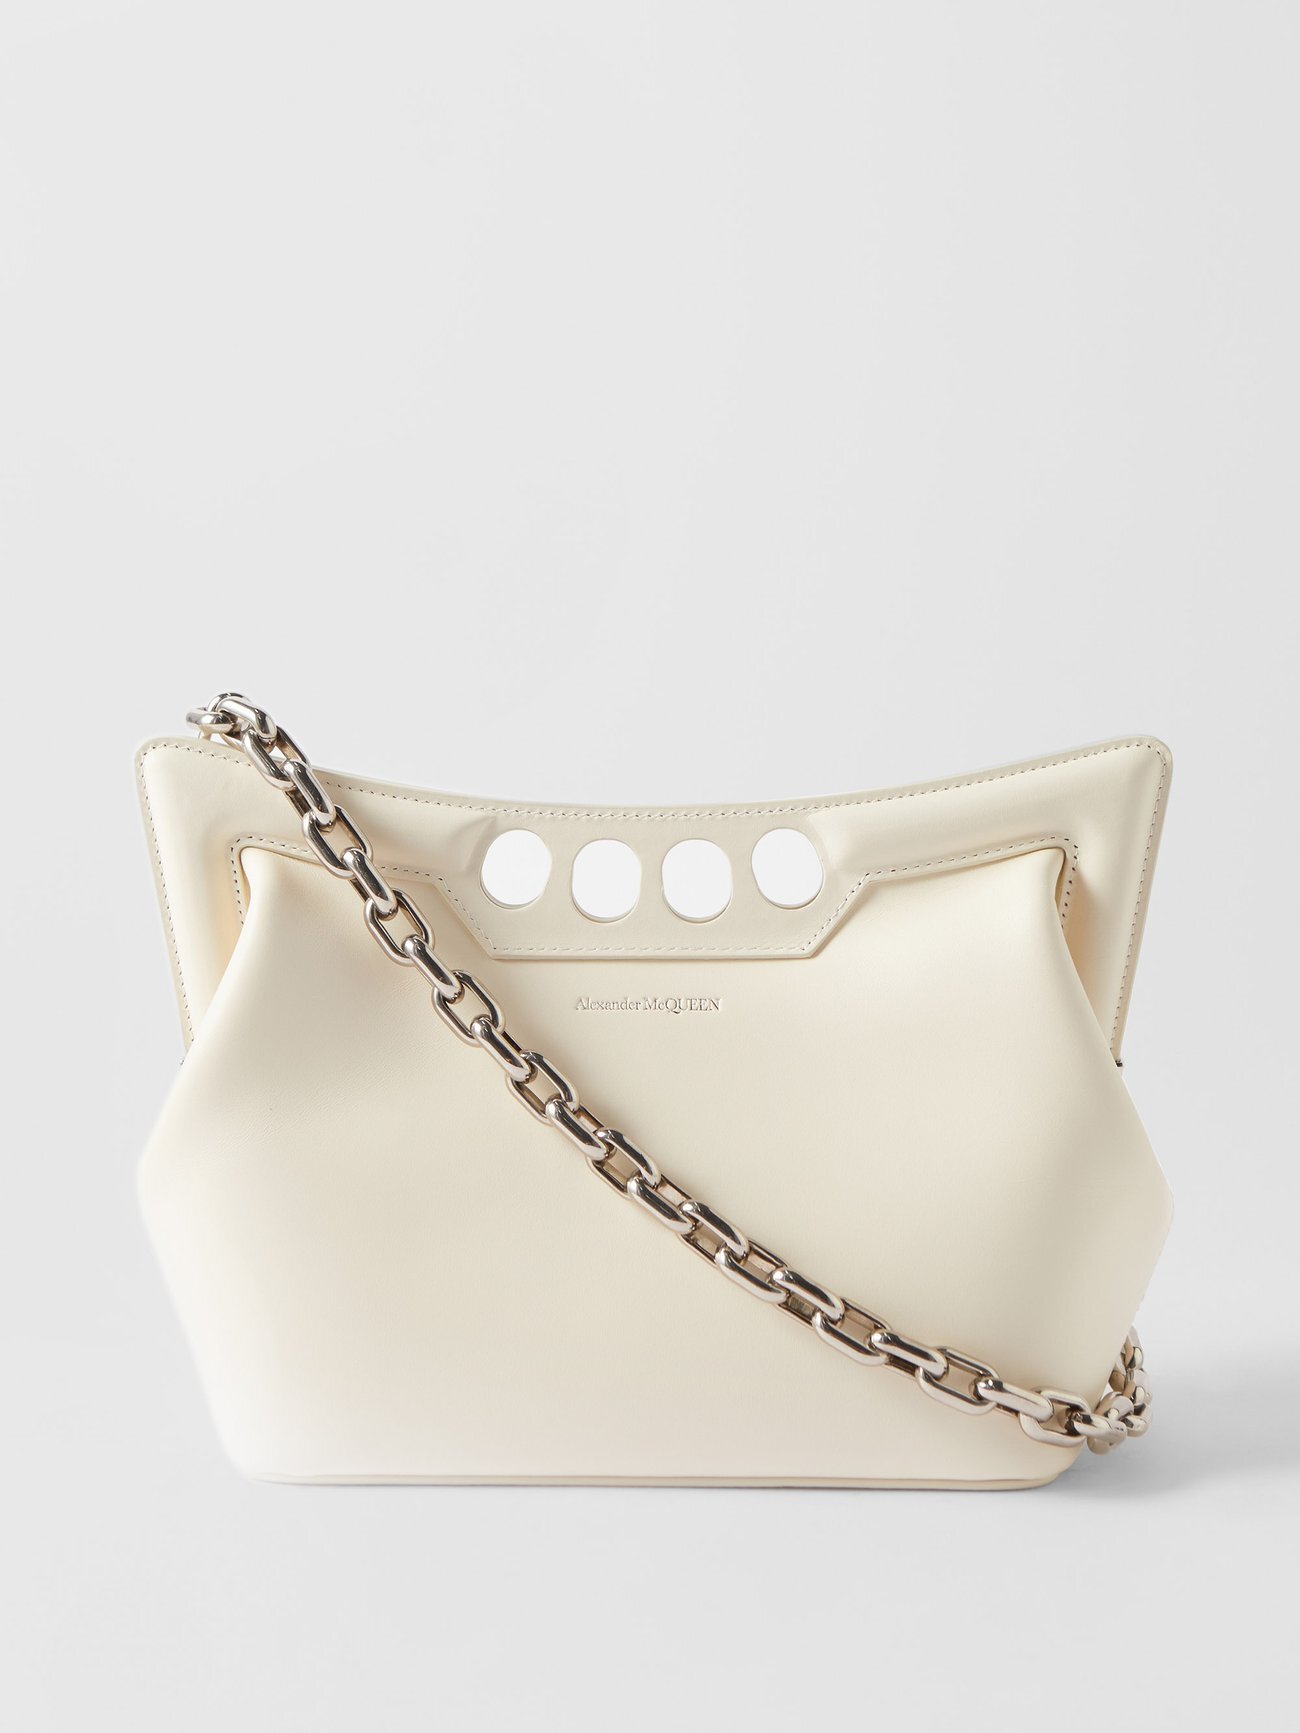 Alexander Mcqueen - The Peak Small Leather Shoulder Bag - Womens - White